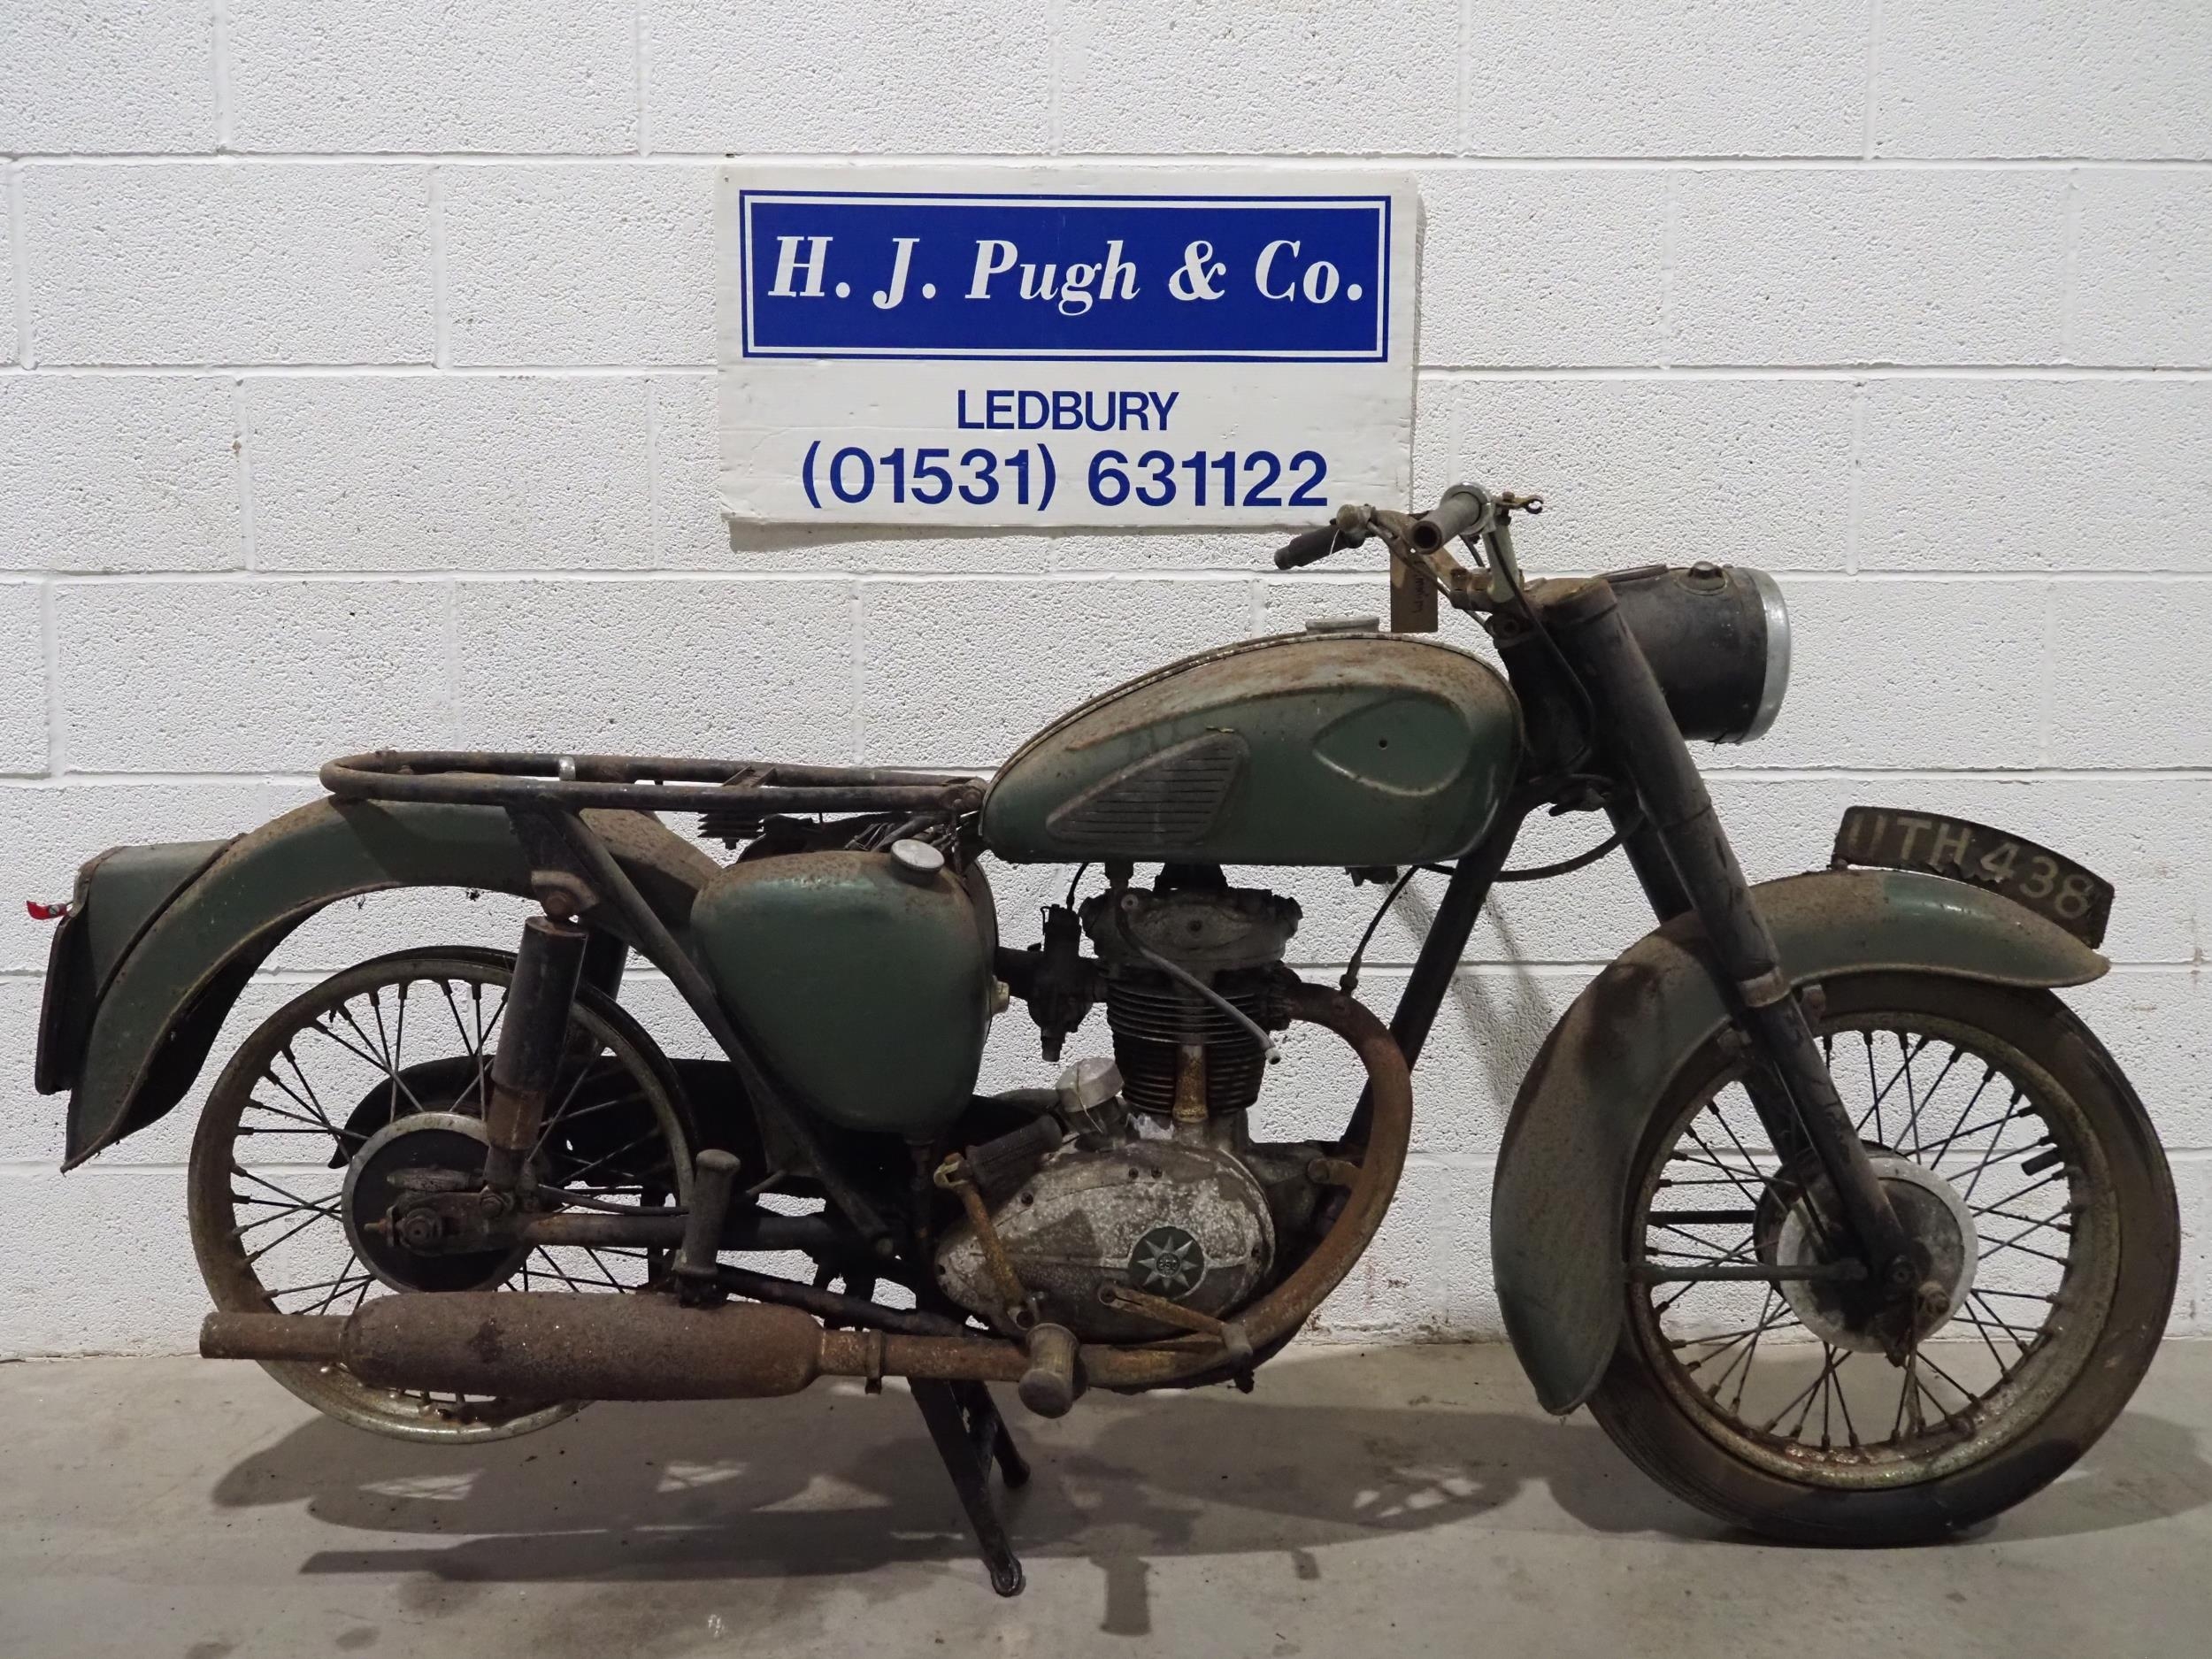 BSA C15 motorcycle project. 1960. 250cc Frame No. C15 15122 Engine No. C15 14993 Has been dry stored